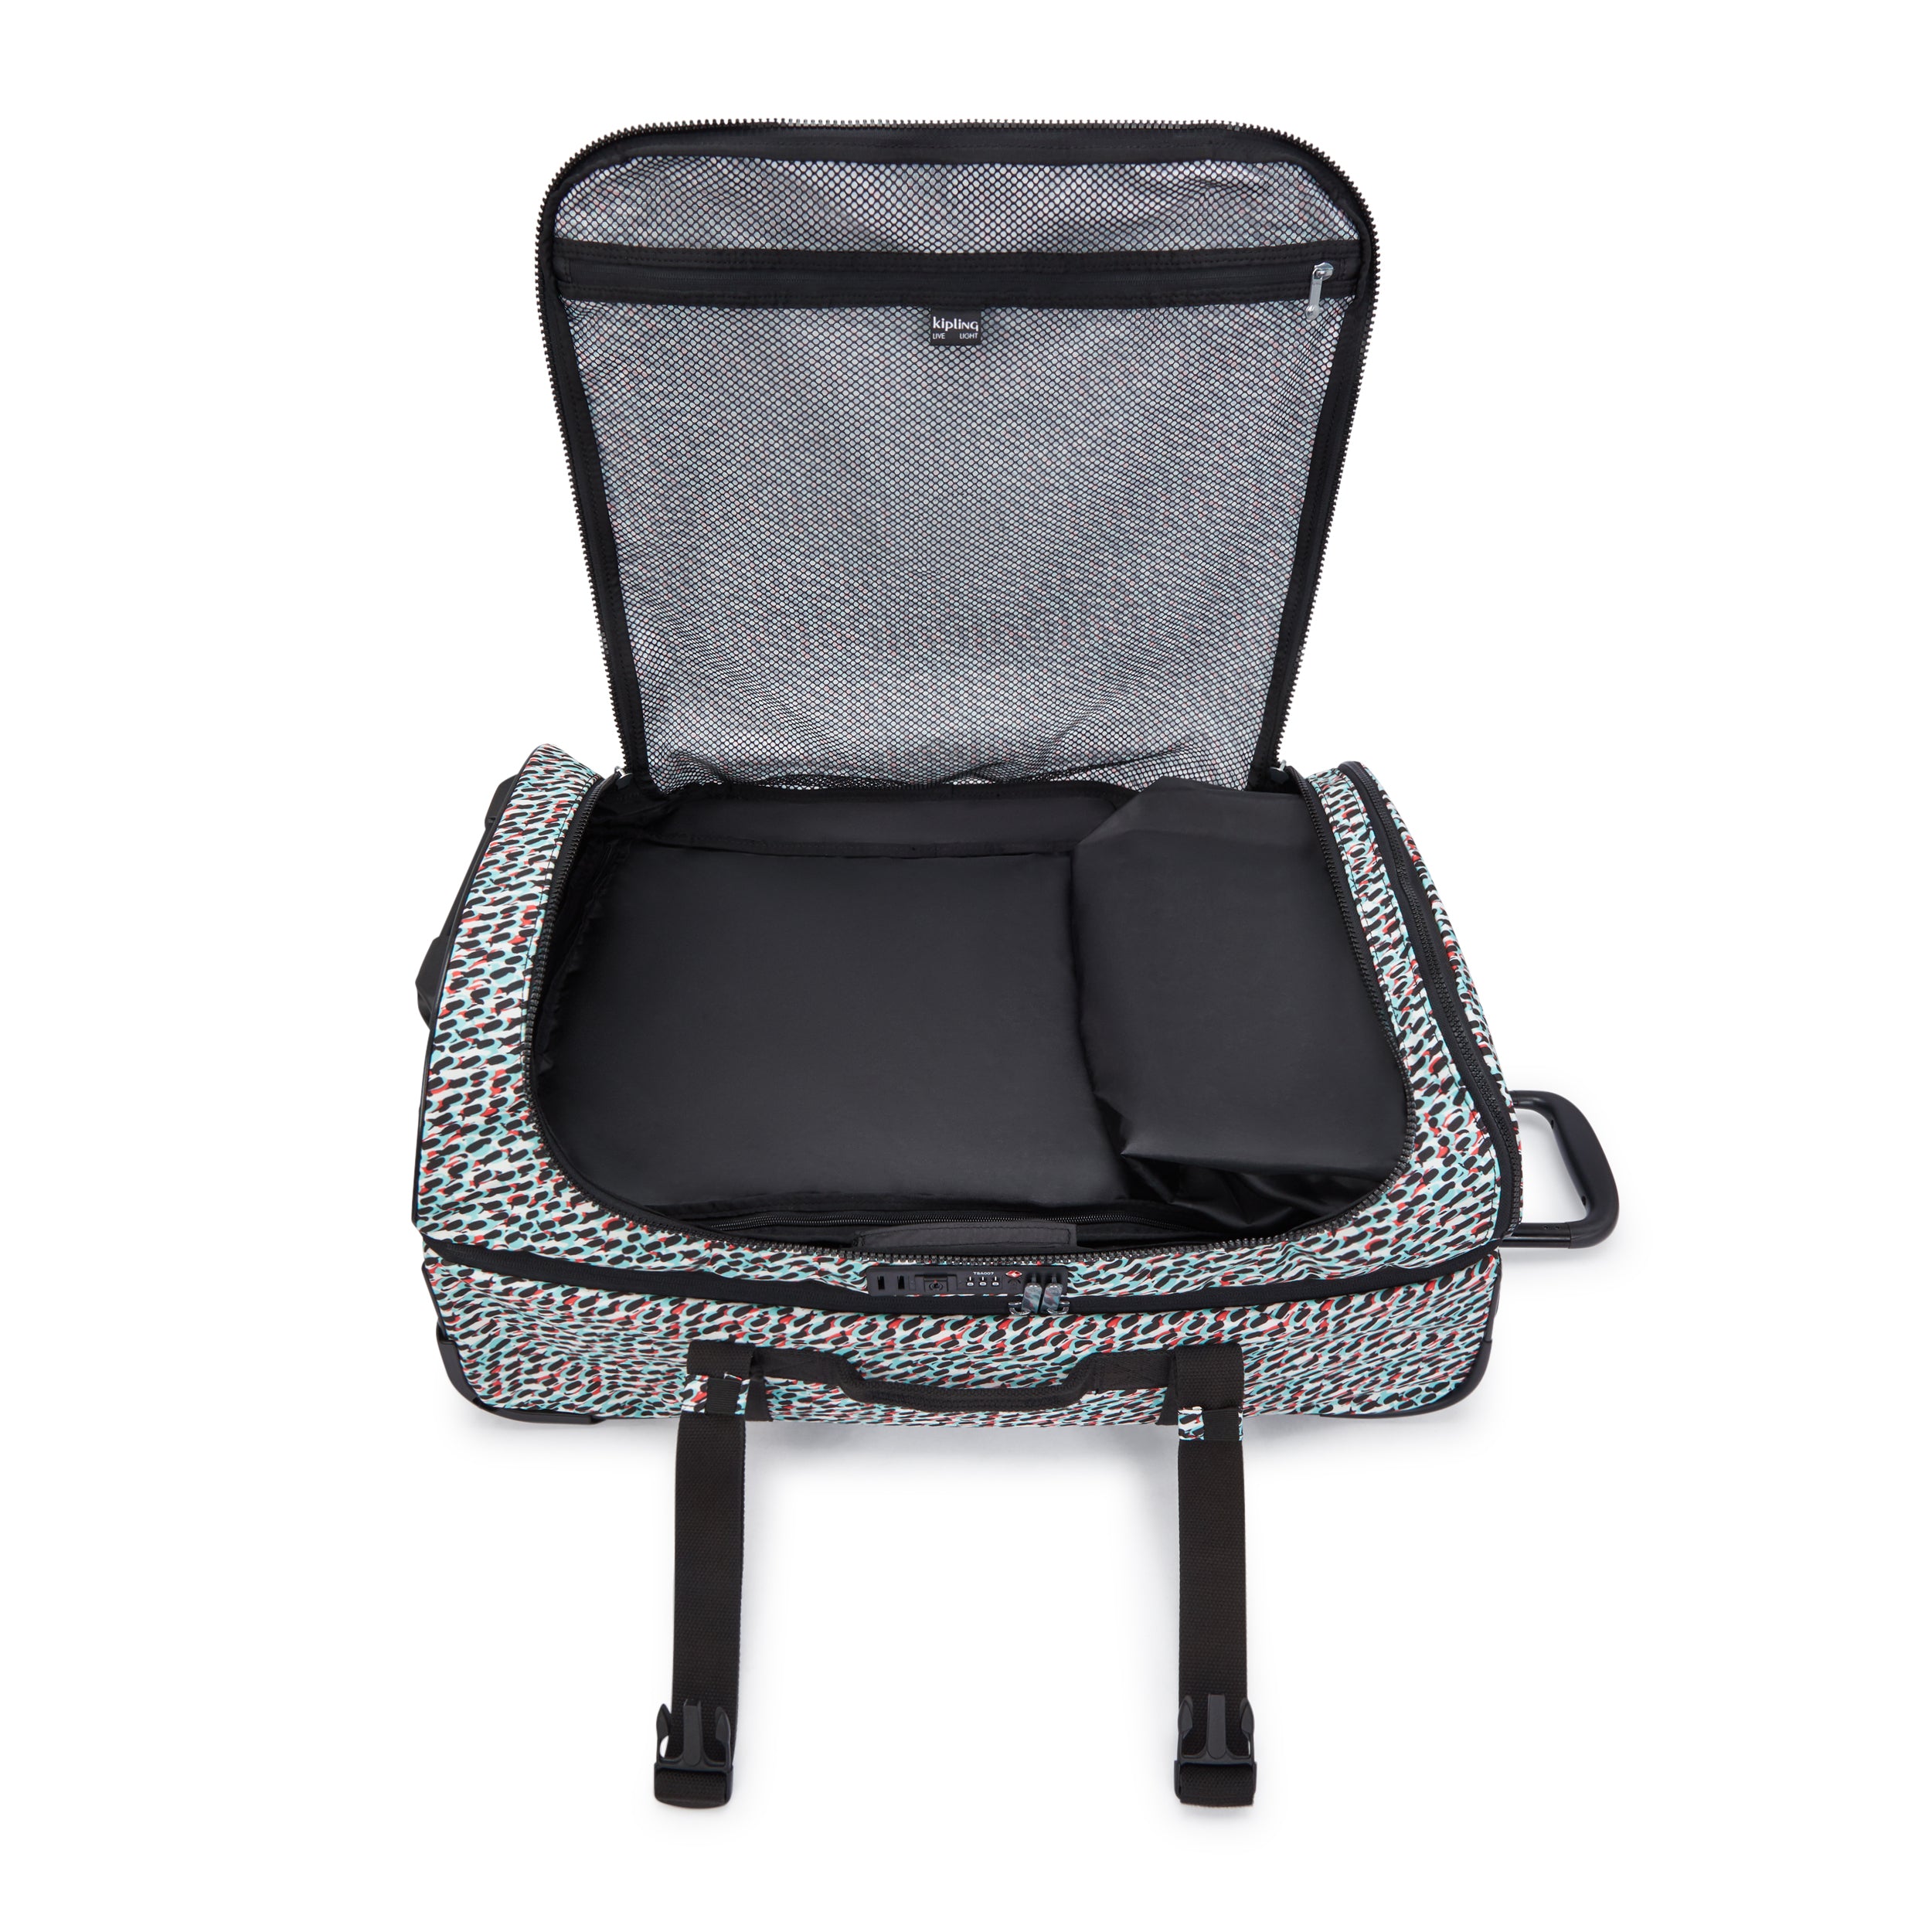 Kipling-Aviana M-Edium Wheeled Suitcase With Adjustable Straps-Abstract Print-I6311-Gn6